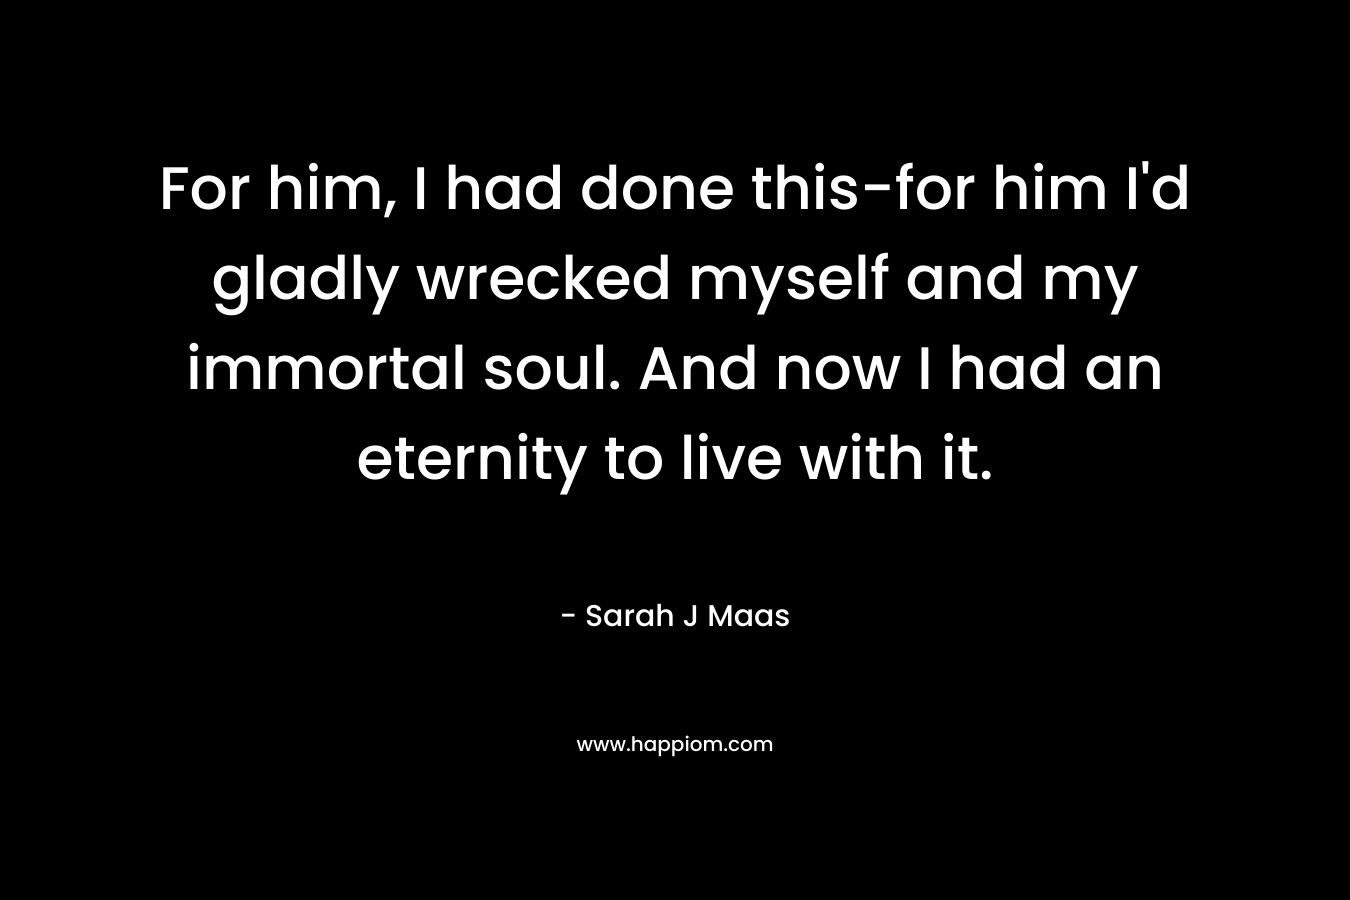 For him, I had done this-for him I’d gladly wrecked myself and my immortal soul. And now I had an eternity to live with it. – Sarah J Maas